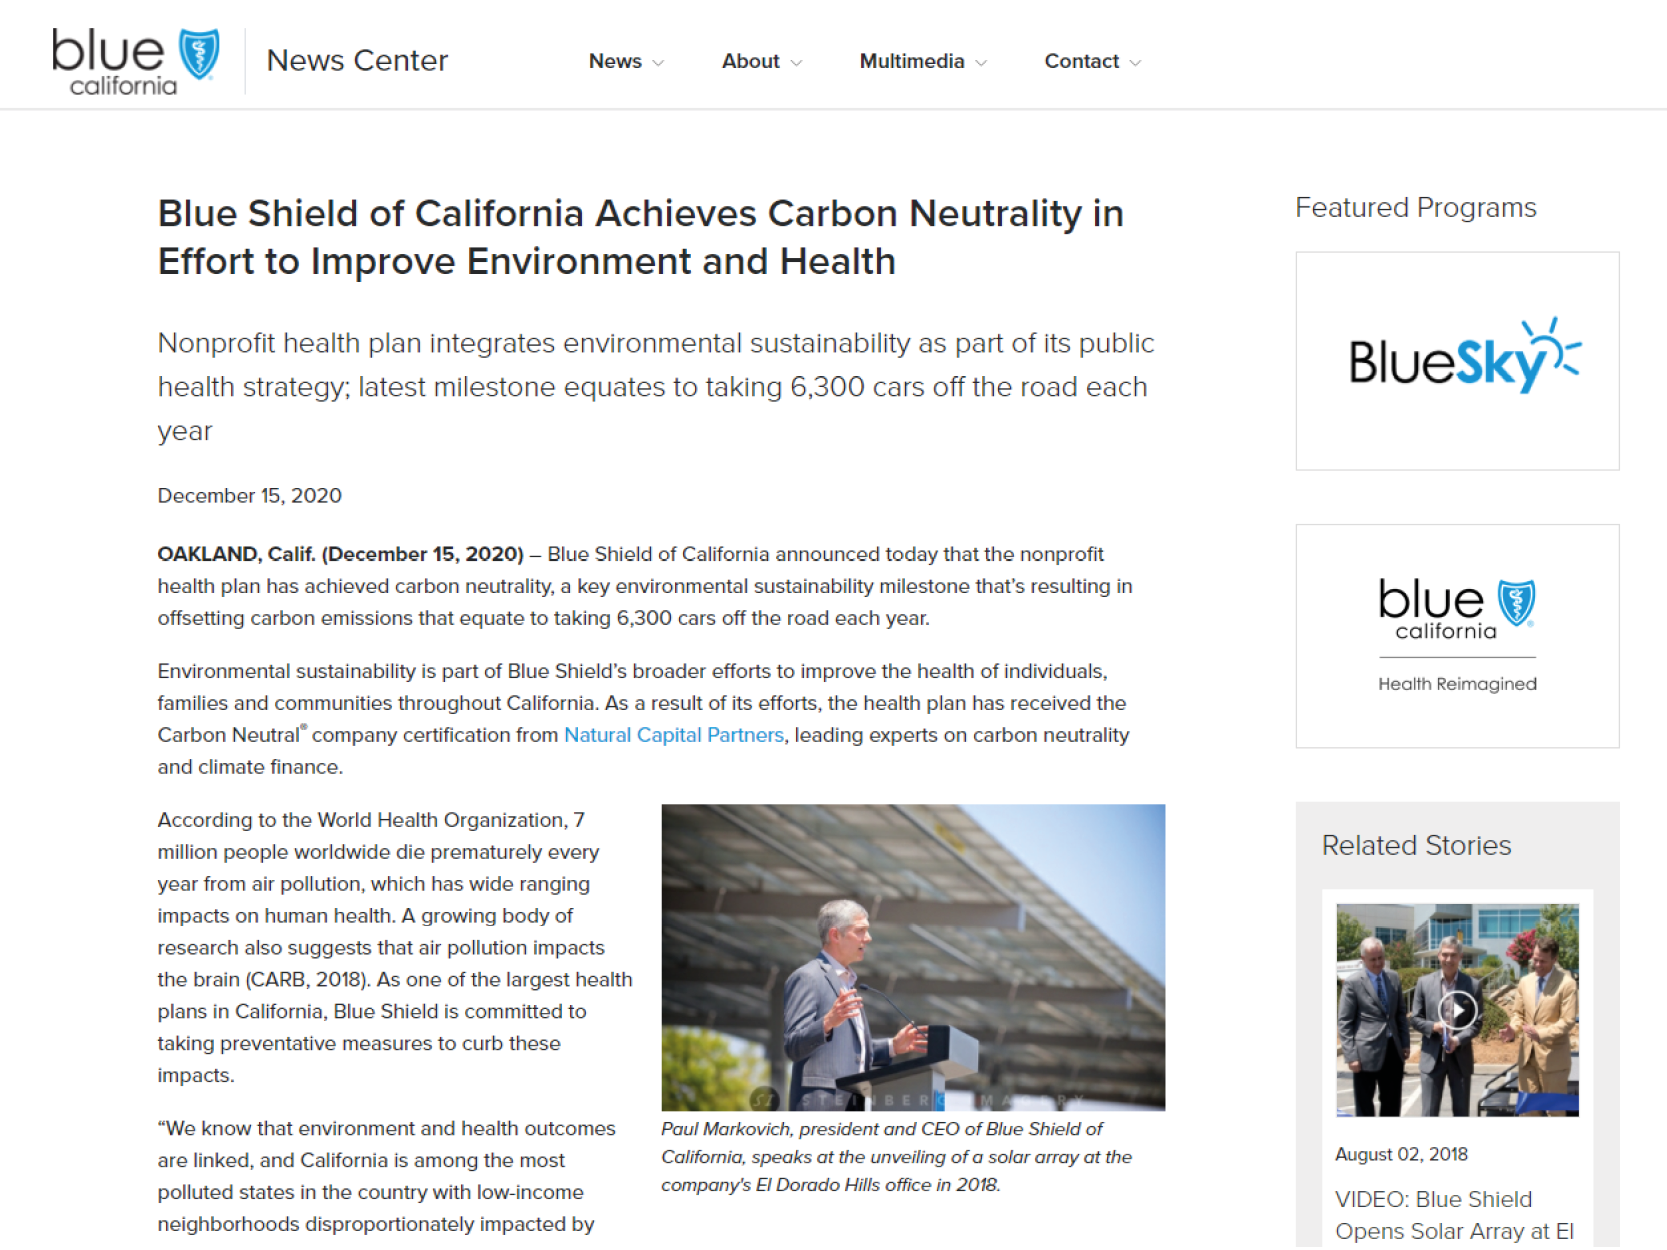 Blue Shield of California Achieves Carbon Neutrality in Effort to Improve Environment and Health